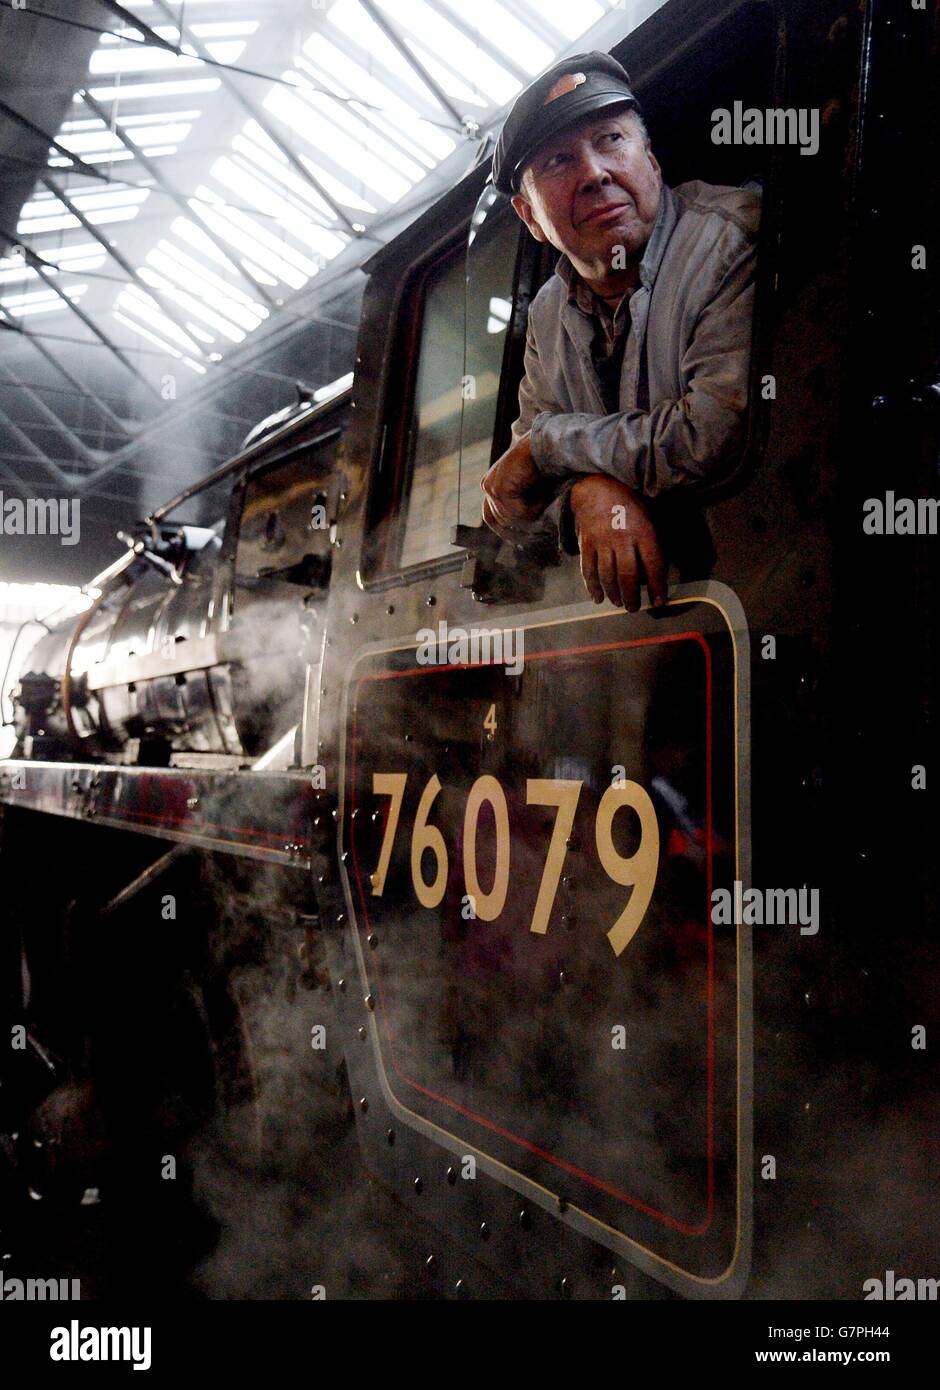 STANDALONE Photo. Trainee driver John Ellis onboard the BR Standard Class 76079 at Pickering Station on the North Yorkshire Moors Railway, as part of events marking the 50th Anniversary of the closure of the line following the Beeching report. Stock Photo